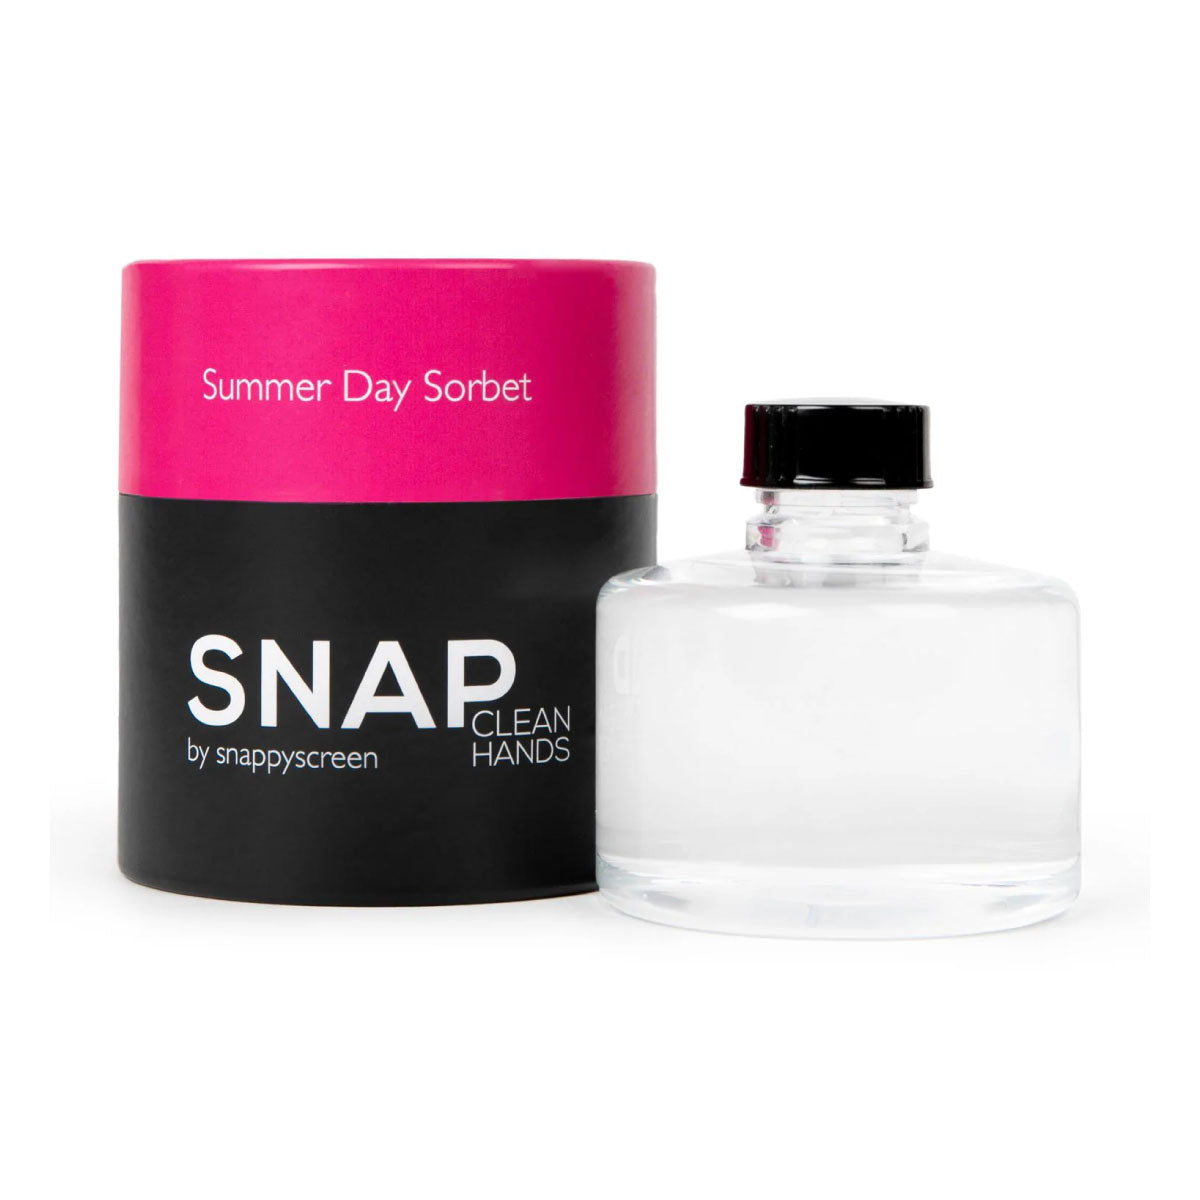 Snap Clean Hands Mister Hand Sanitizer Refill in Summer Day Sorbet